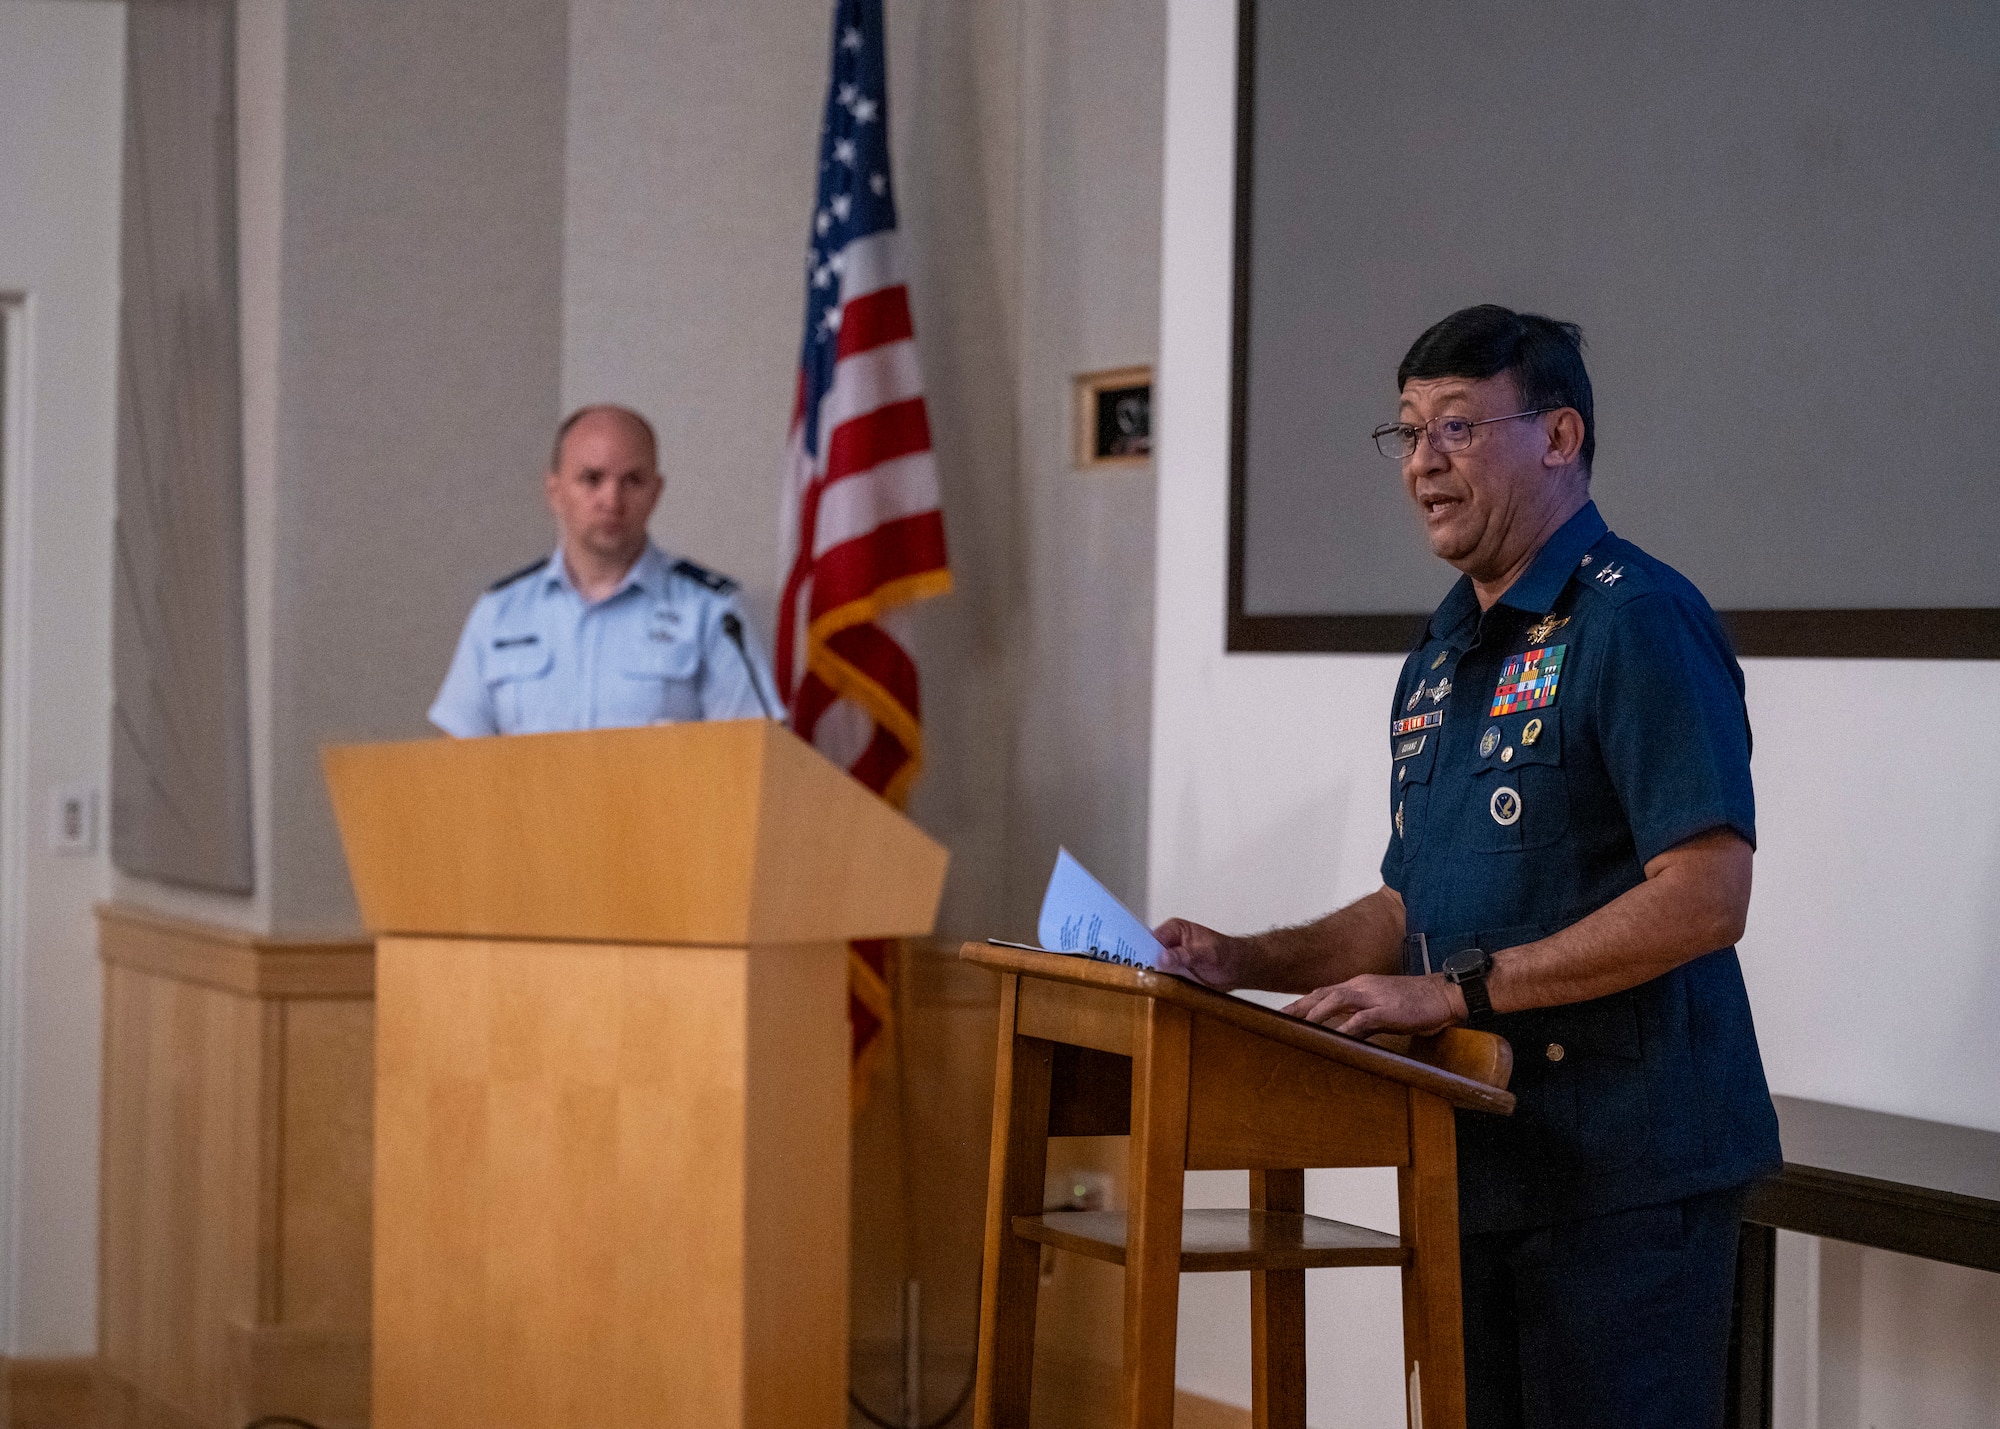 Photo of Philippine Air Force officer speaking